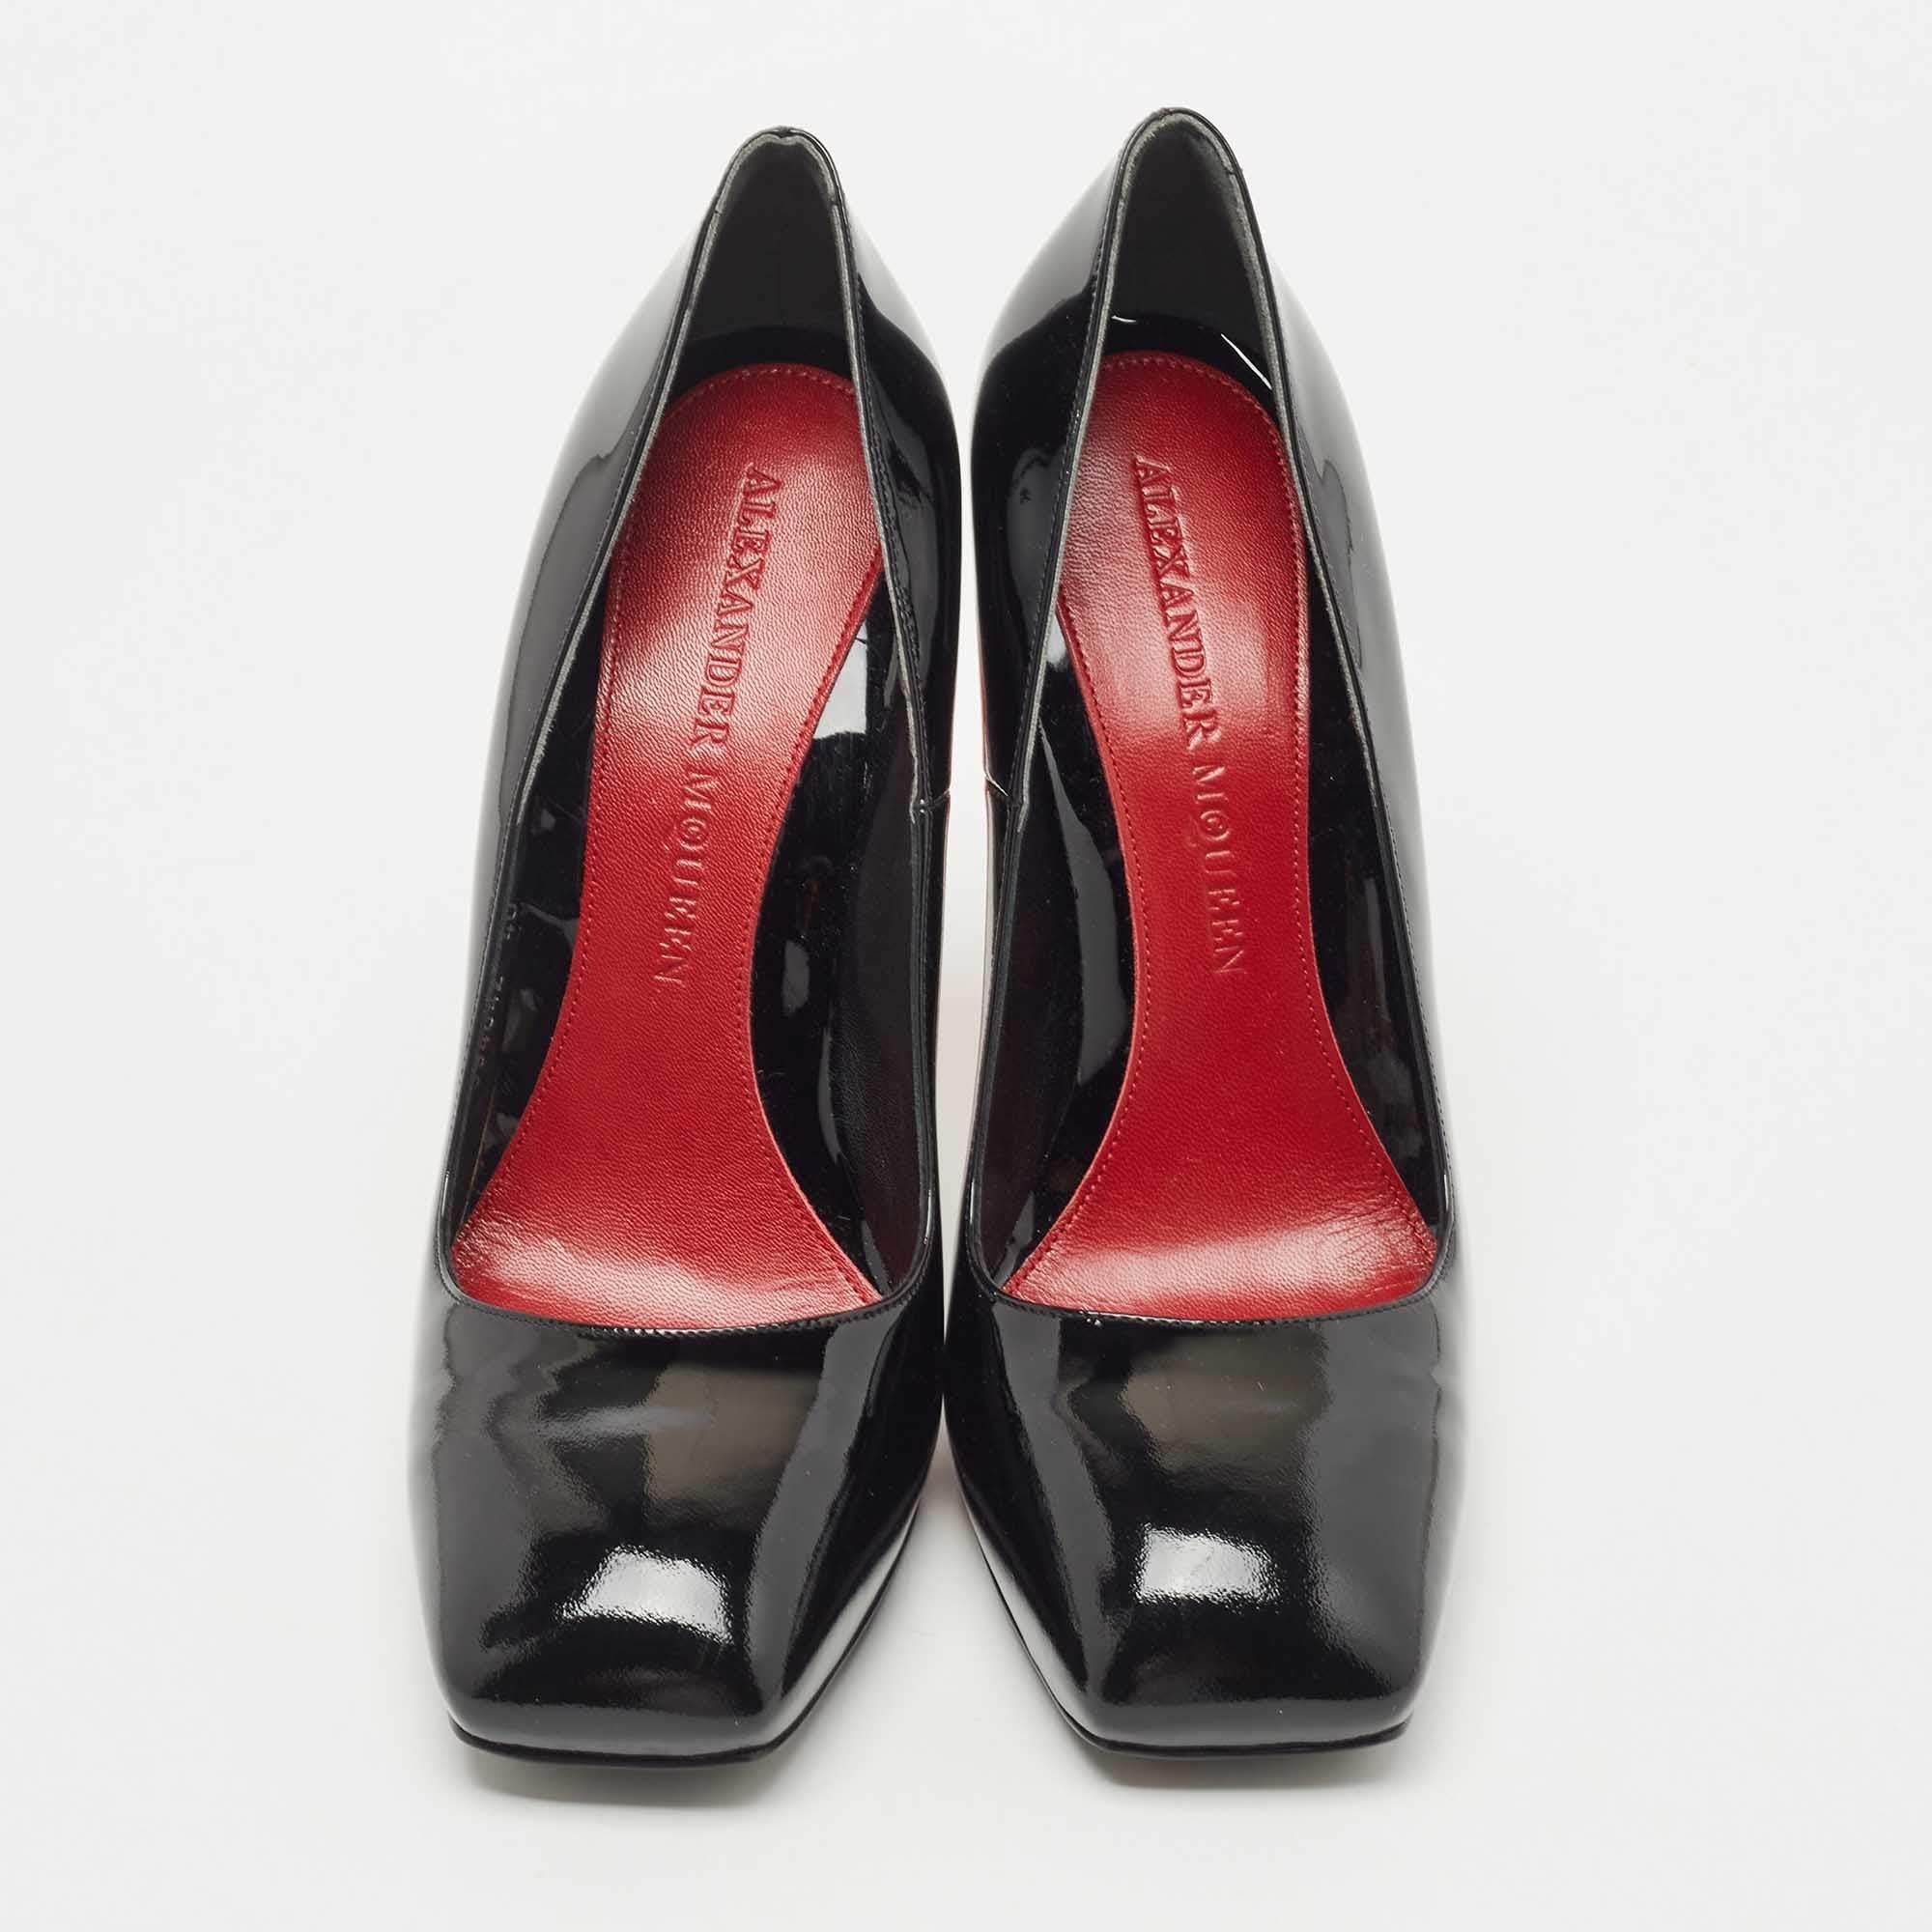 Exhibit an elegant style with this pair of pumps. These elegant shoes are crafted from quality materials. They are set on durable soles and sleek heels.

Includes: Original Box, Extra Heel Tips

